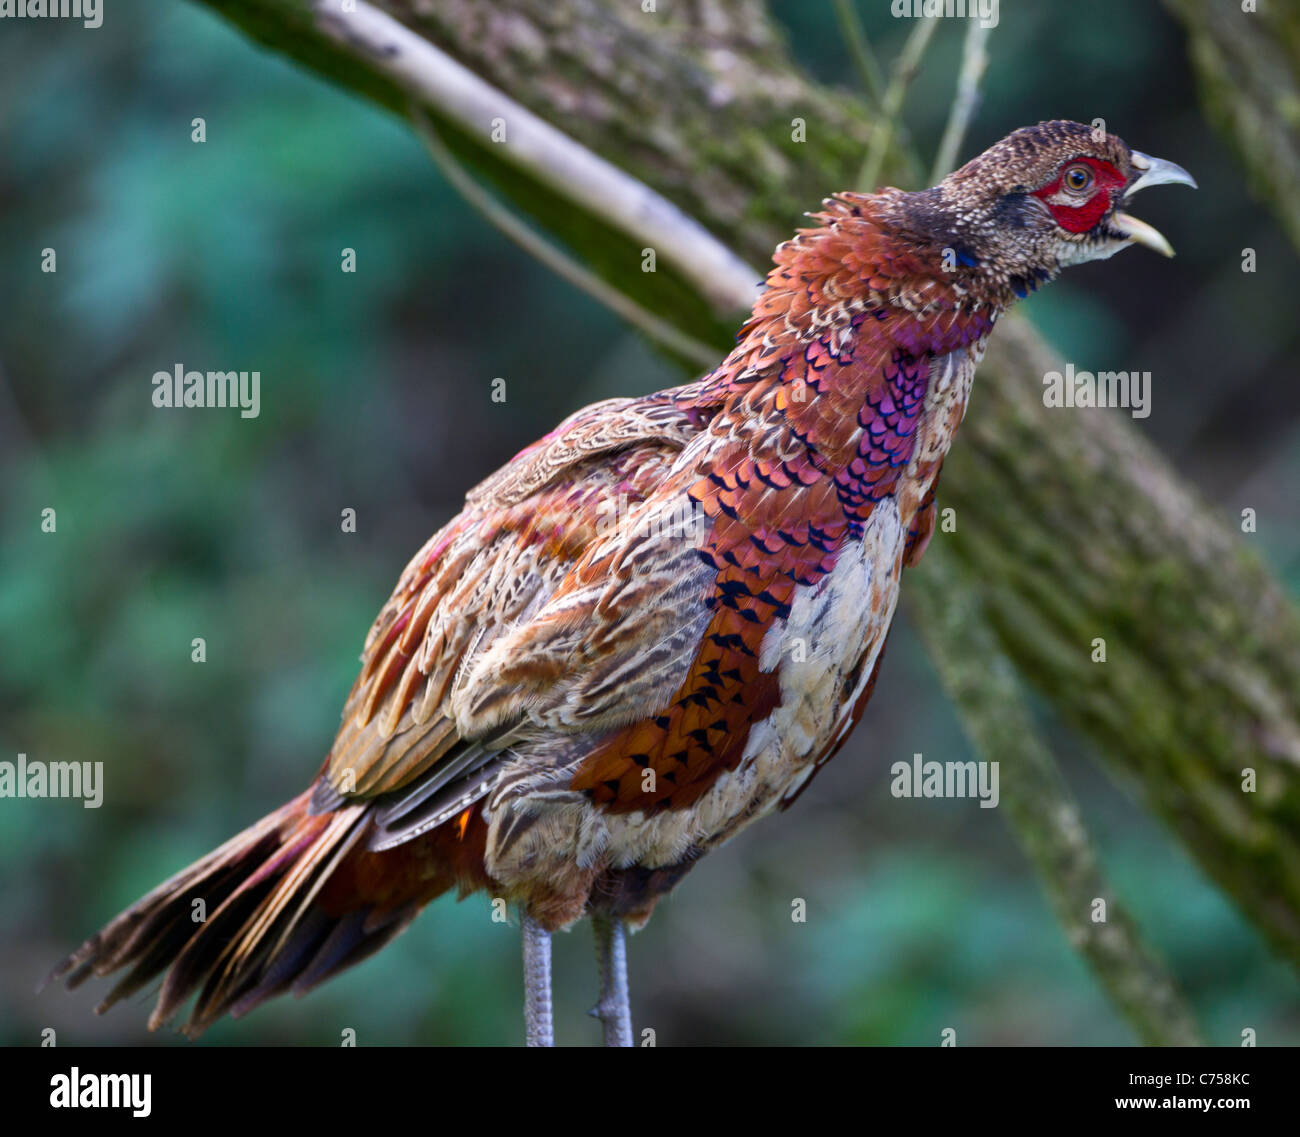 Pheasant juvenile male Phasianus colchicus in heavy moult perched on branch Stock Photo